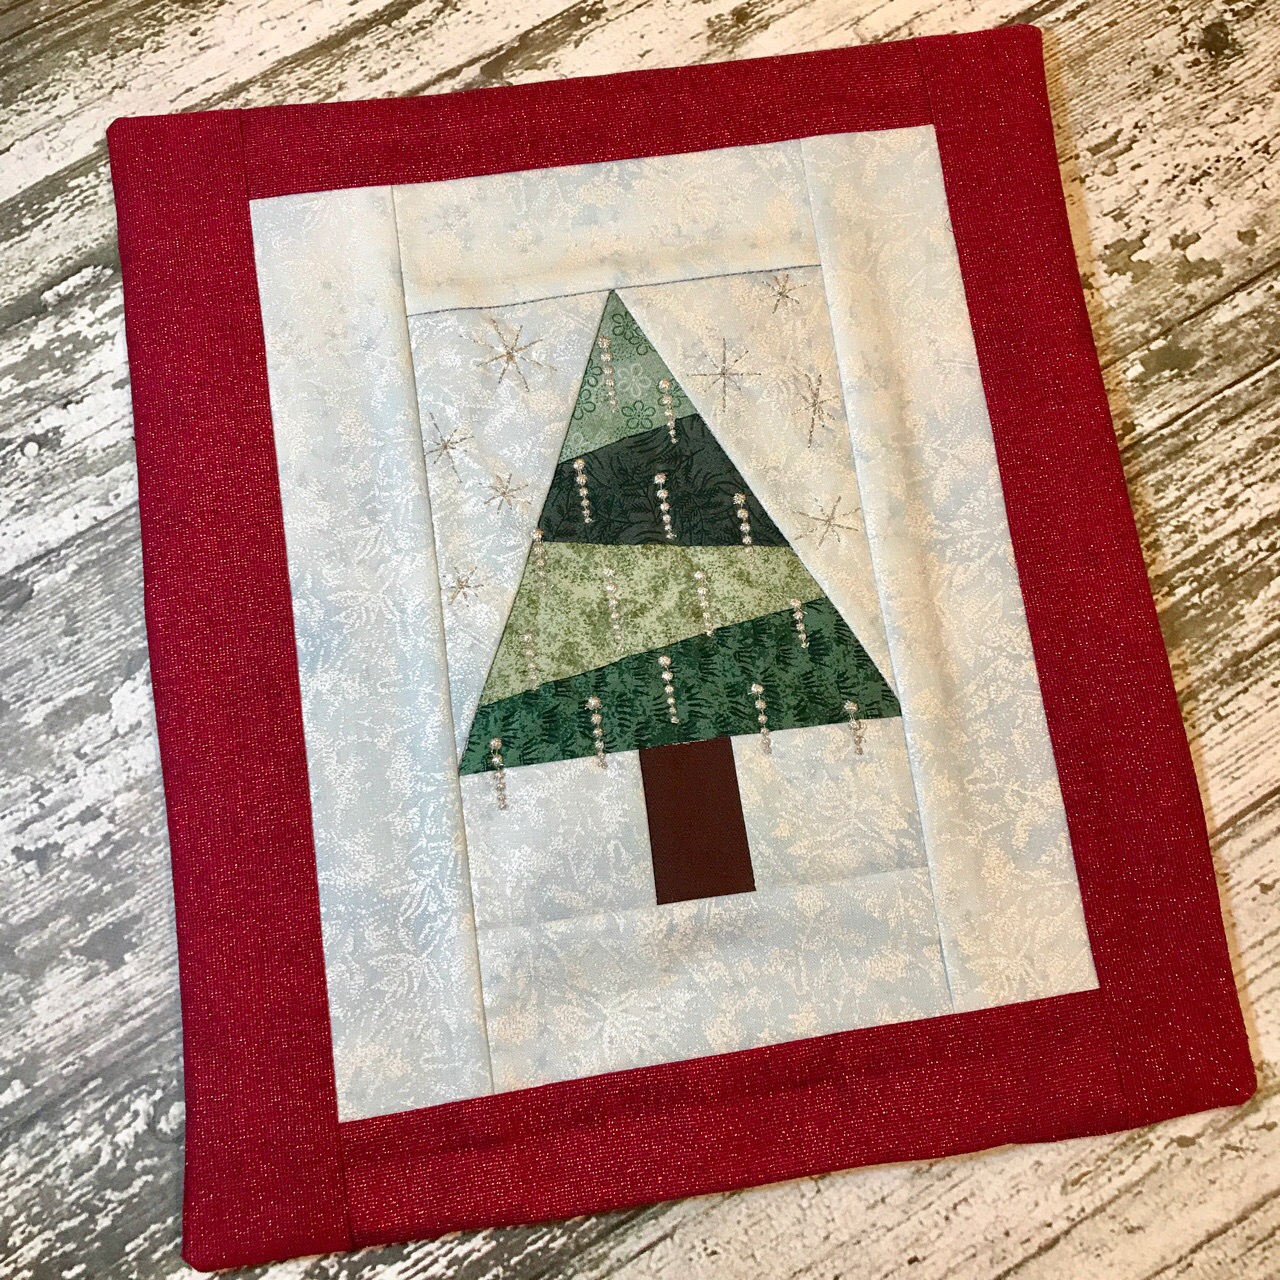 Paper Pieced Holiday Tree: A Machine Embroidered Quilting Design